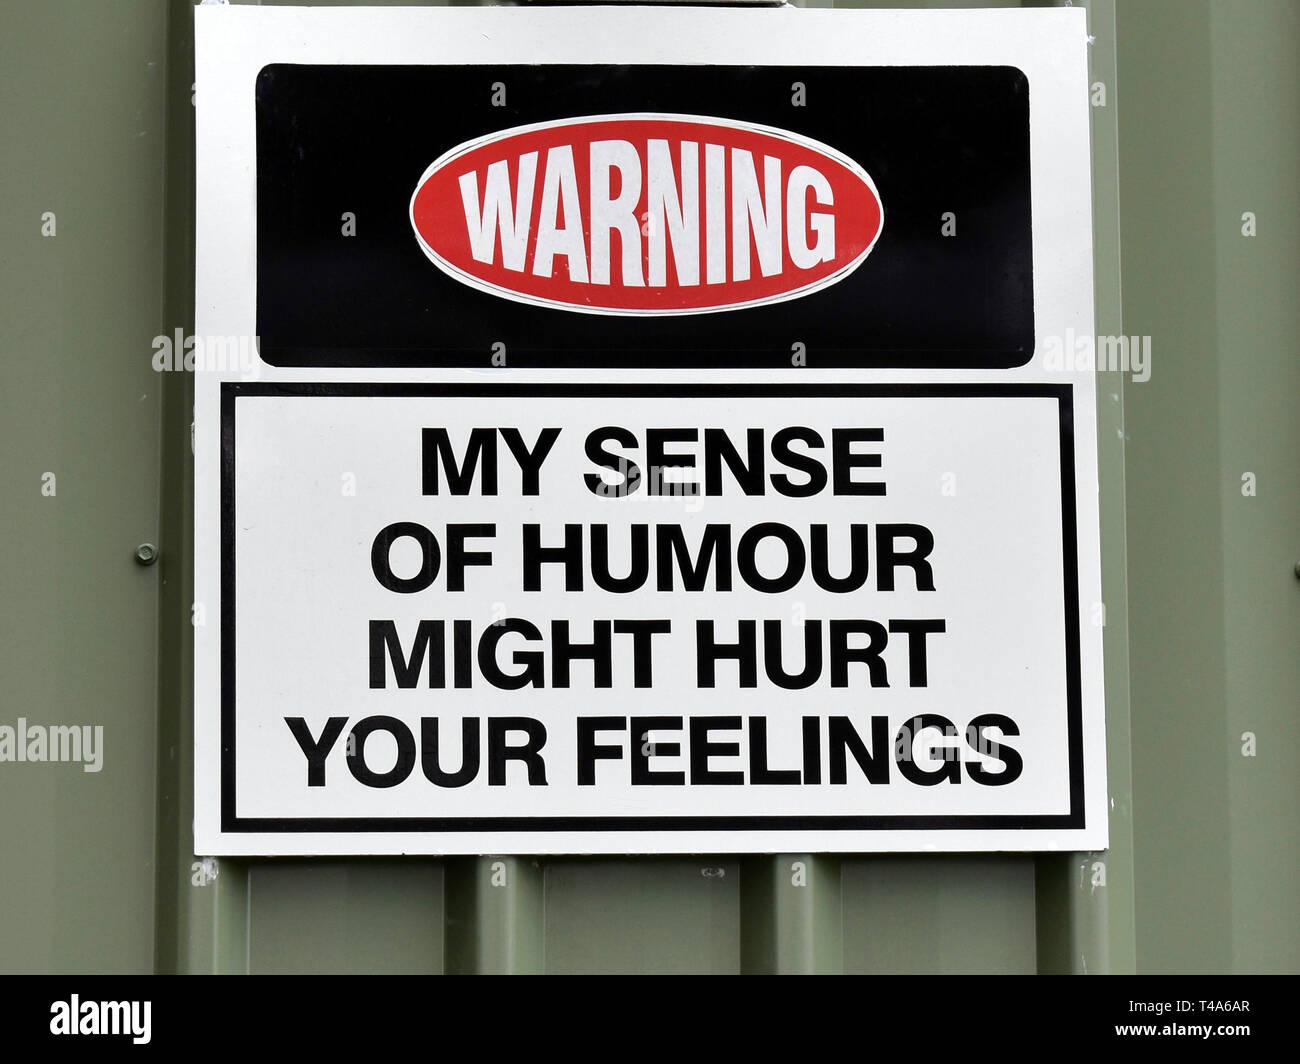 An amusing sign attached to a building warning 'My sense of humour might hurt your feelings' Stock Photo